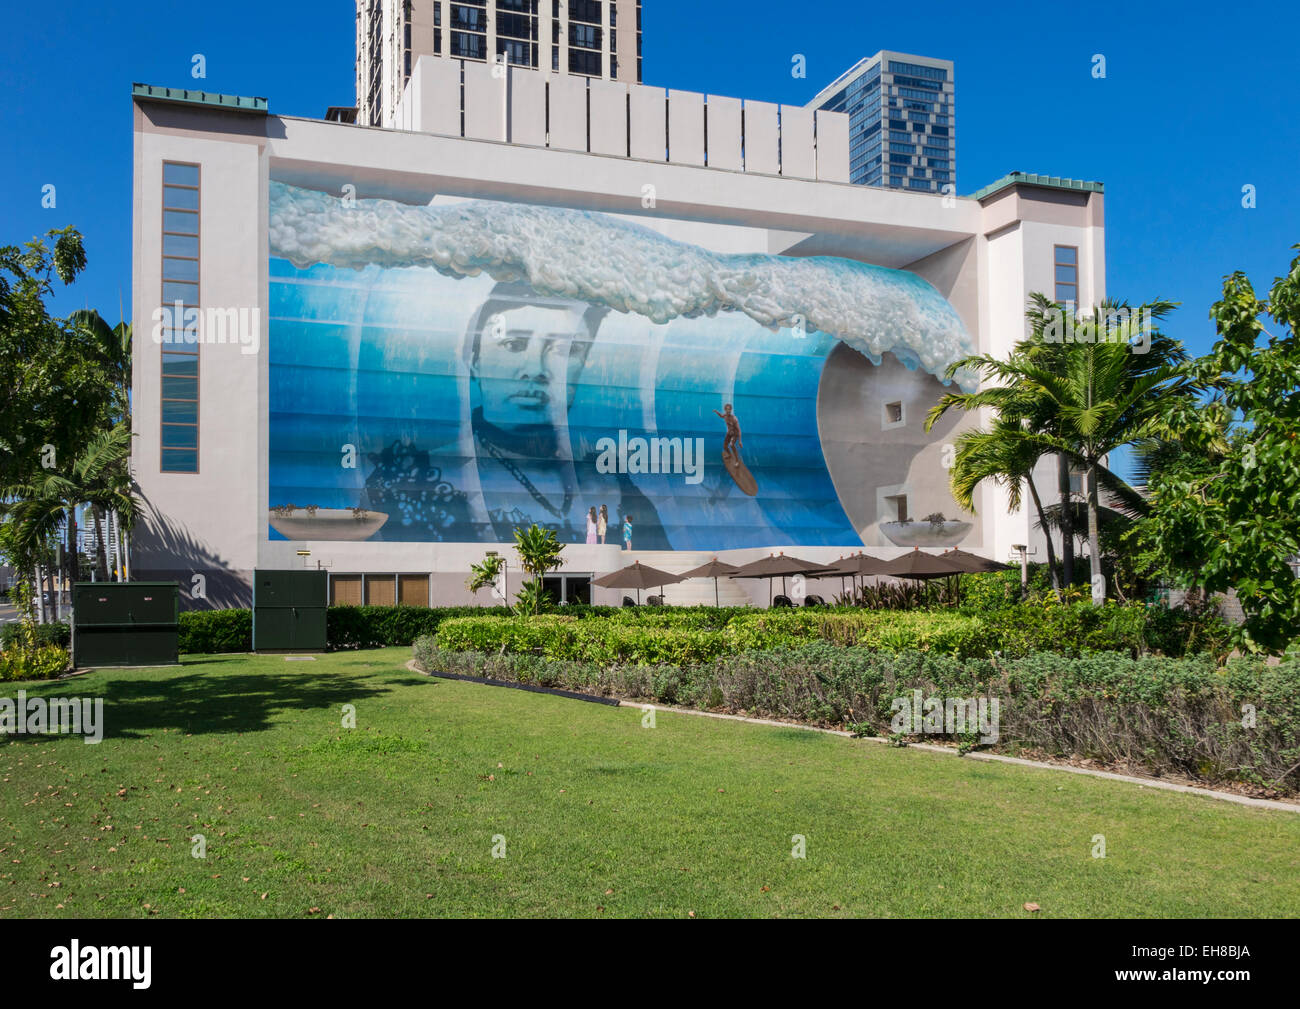 Famous wall mural known as Mana Nalu or Spirit of the Wave in Honolulu, Oahu, Hawaii Stock Photo